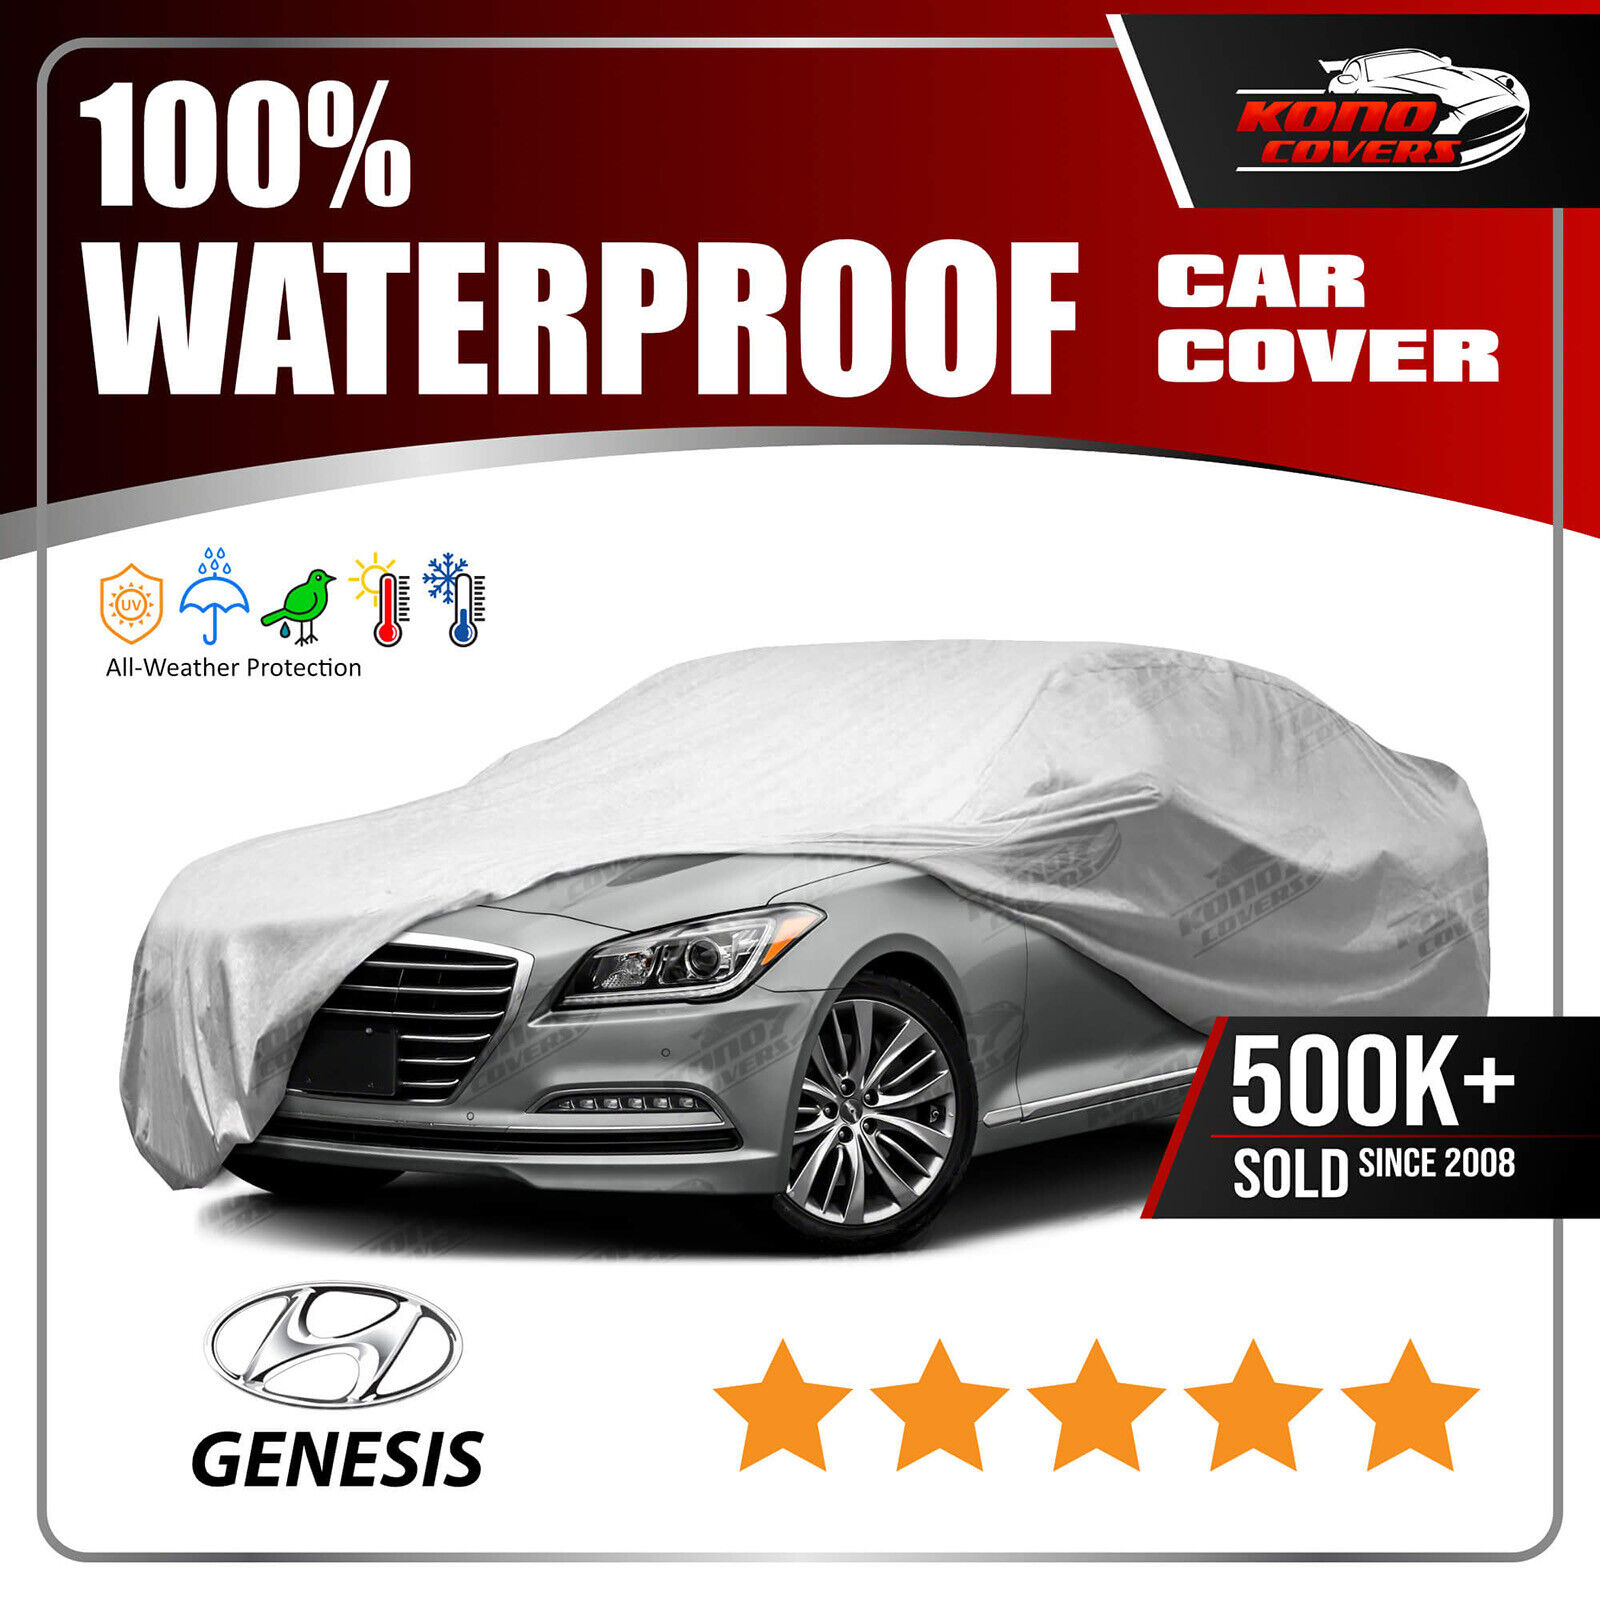 FITS HYUNDAI GENESIS COUPE 2010-2015 CAR COVER- 100% Waterproof 100% Breathable